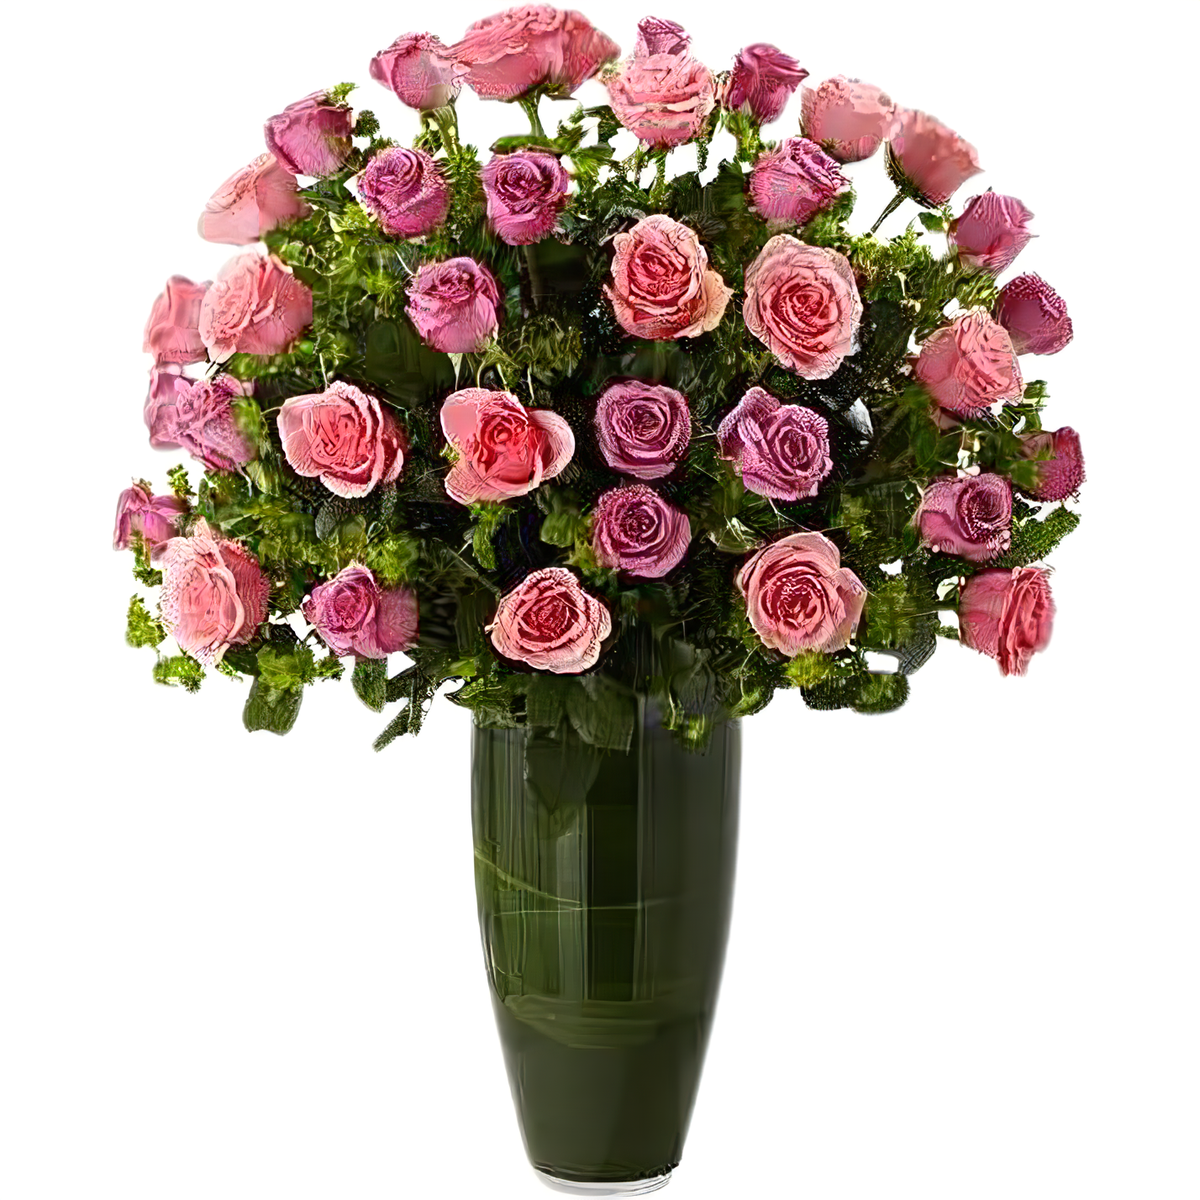 Manhattan Flower Delivery - Luxury Rose Bouquet - 24 Premium Pink &amp; Lavender Long Stem Roses - Products &gt; Luxury Collection